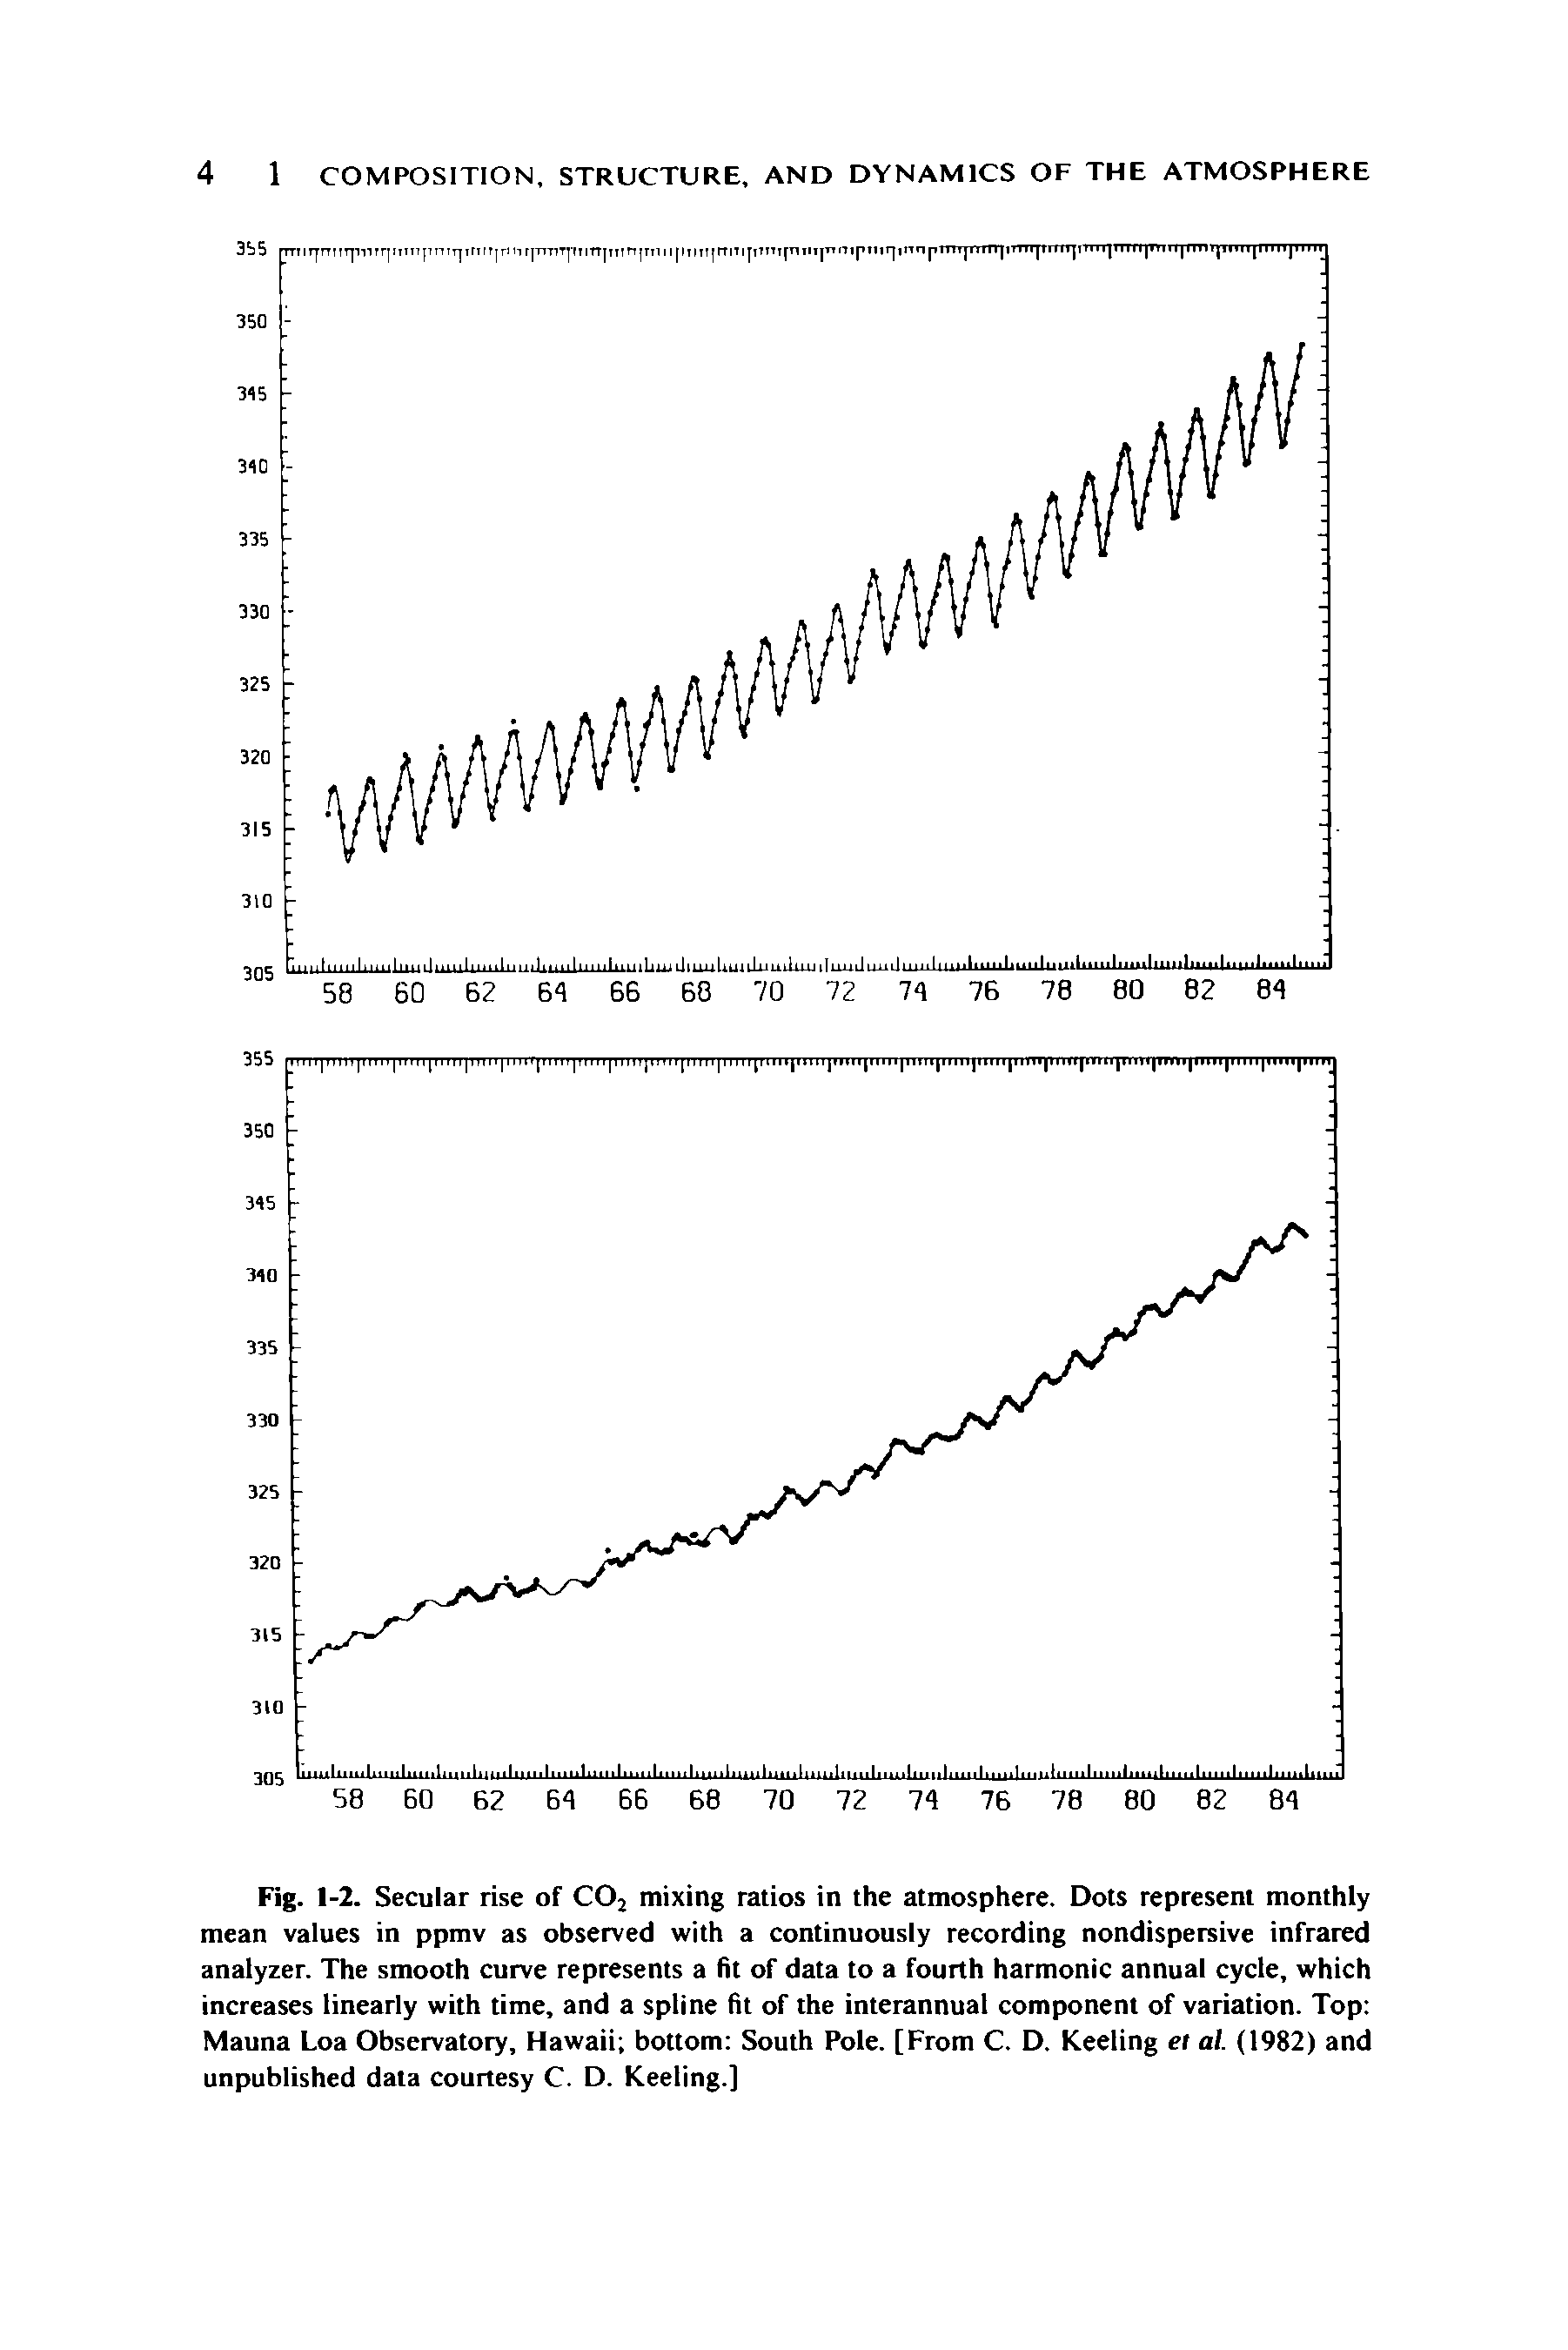 Fig. 1-2. Secular rise of C02 mixing ratios in the atmosphere. Dots represent monthly mean values in ppmv as observed with a continuously recording nondispersive infrared analyzer. The smooth curve represents a fit of data to a fourth harmonic annual cycle, which increases linearly with time, and a spline fit of the interannual component of variation. Top Mauna Loa Observatory, Hawaii bottom South Pole. [From C. D. Keeling el al. (1982) and unpublished data courtesy C. D. Keeling.]...